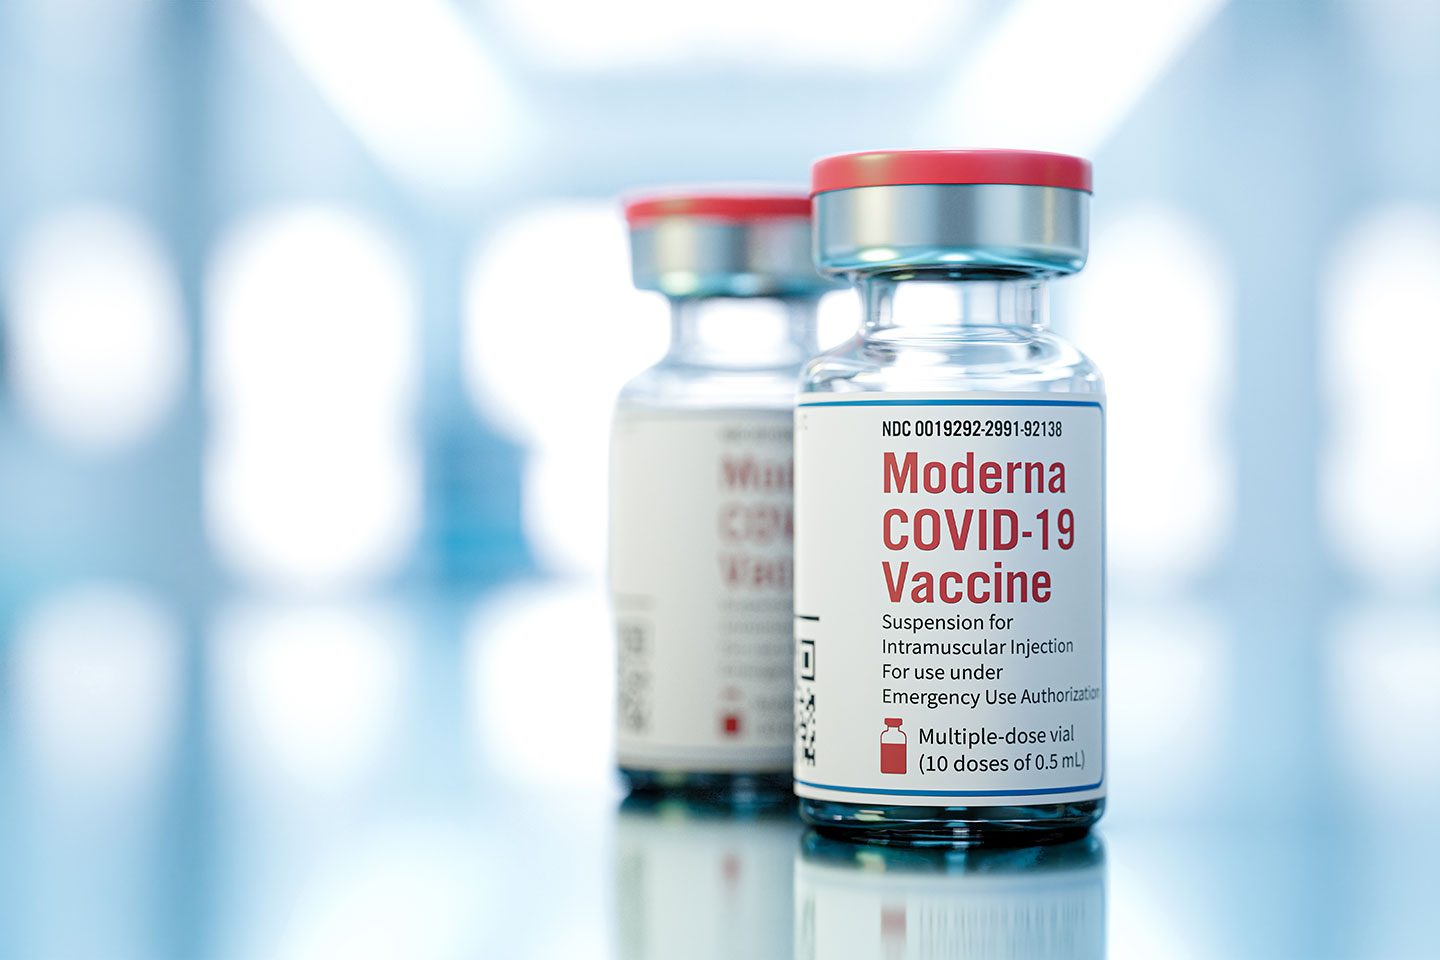 Gavi signs agreement with Moderna to secure doses on behalf of COVAX Facility | Gavi, the Vaccine Alliance